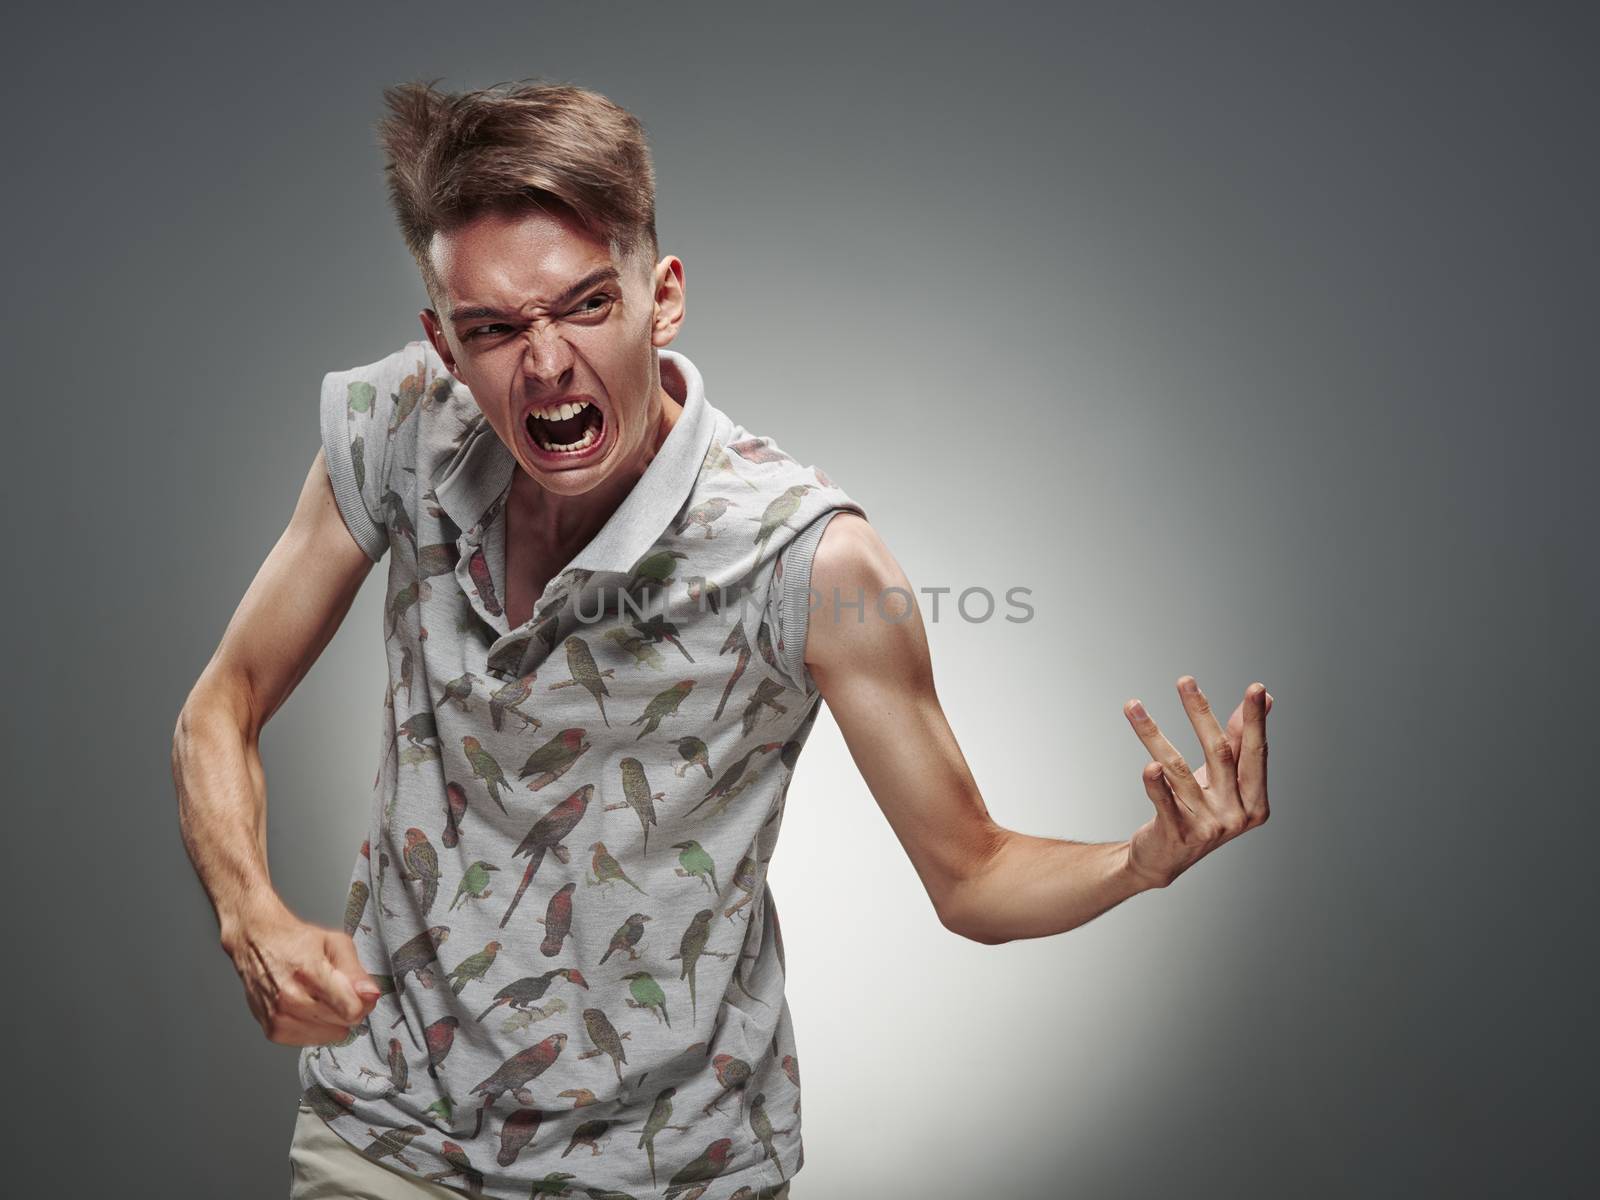 Emotional portrait of a teenager  playing on air guitar on a gray background